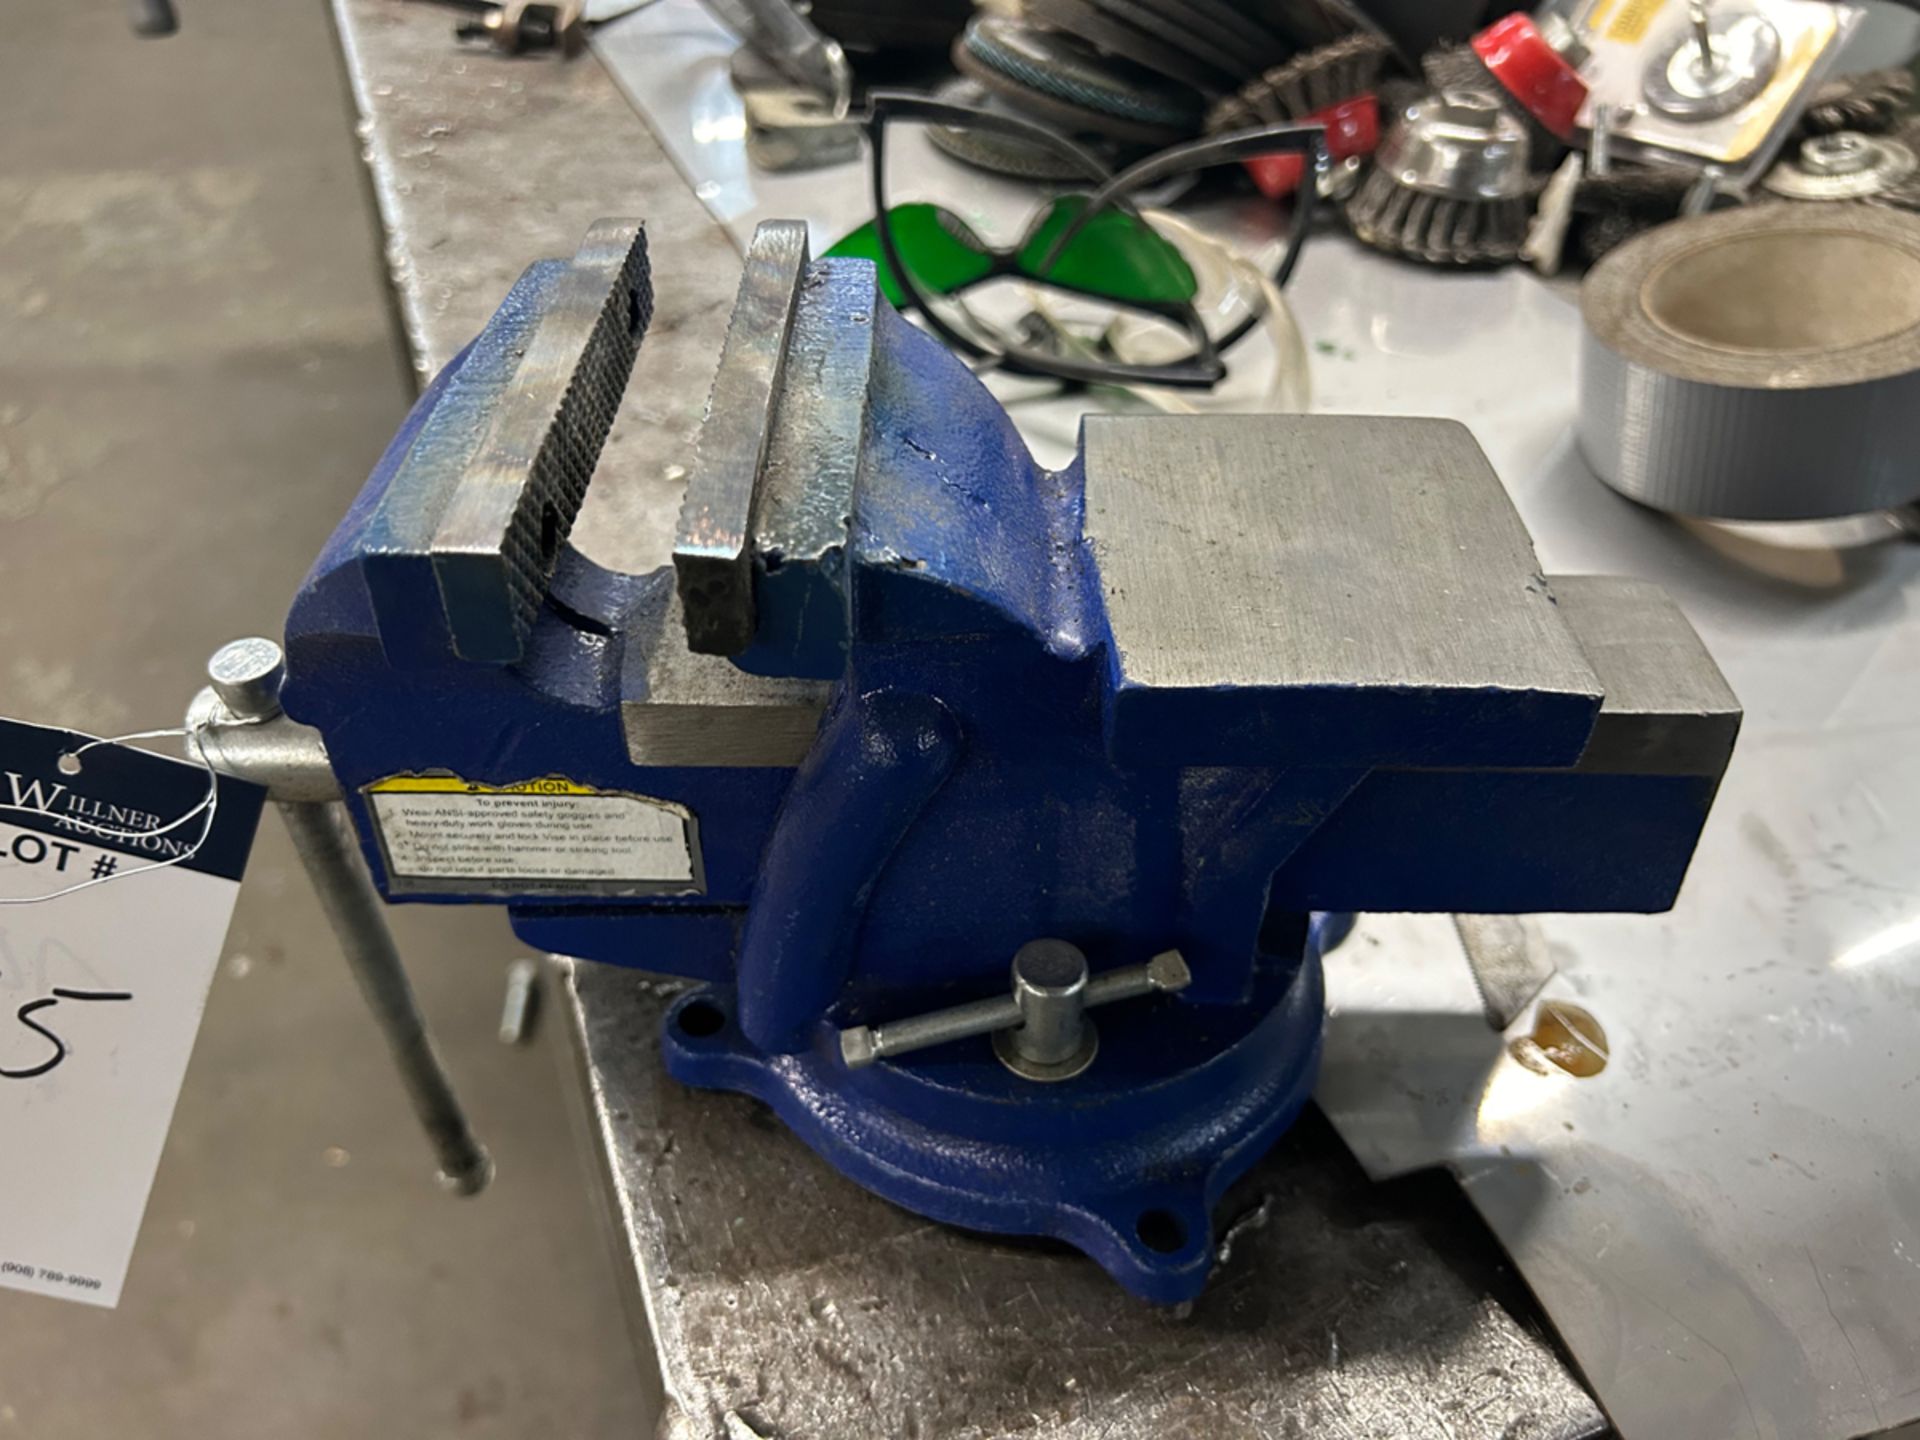 Central Forge 4" Swivel Vise - Image 3 of 4